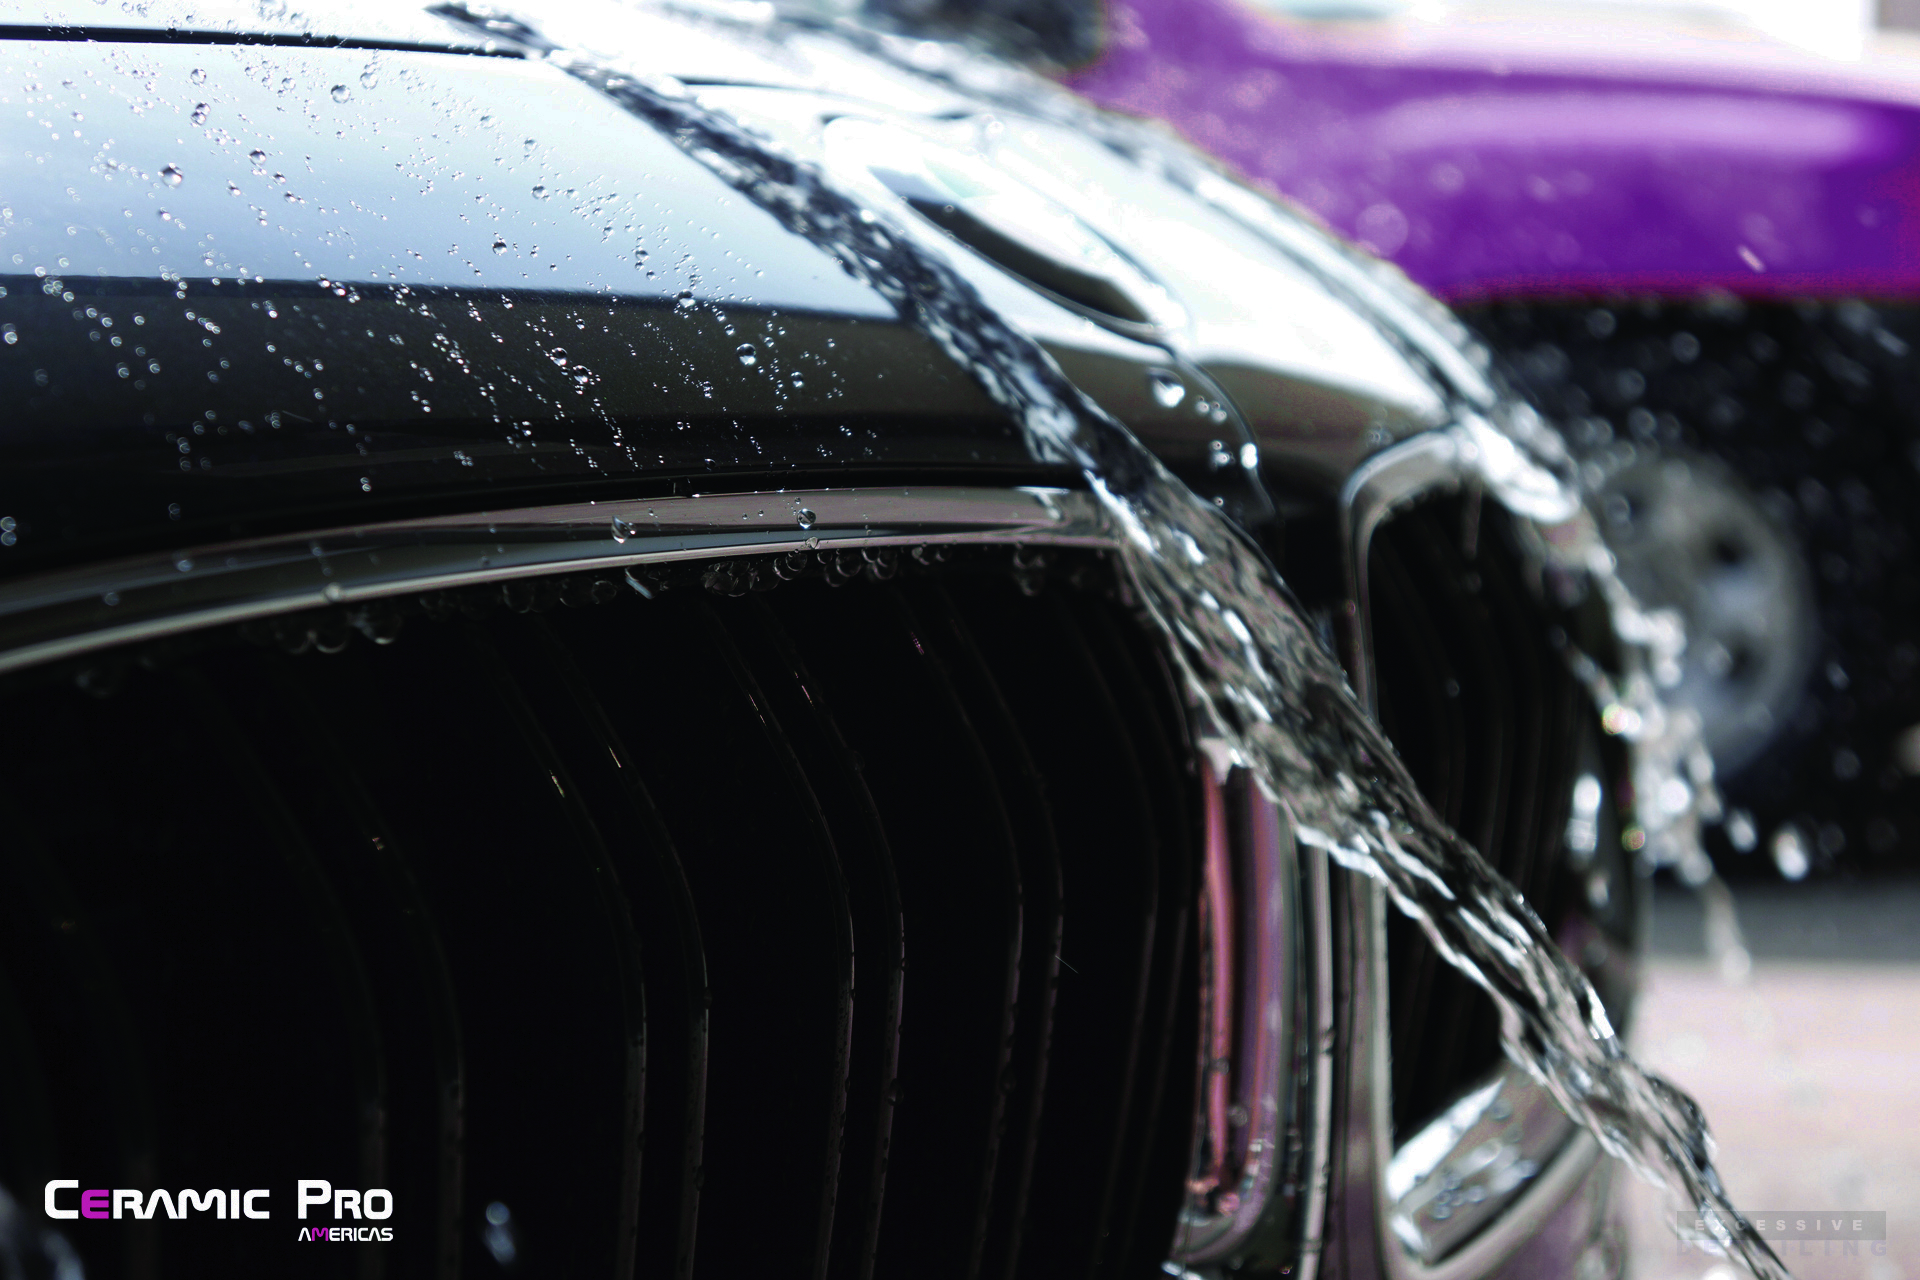 The Ultimate Guide to DIY Car Detailing - Ceramic Pro